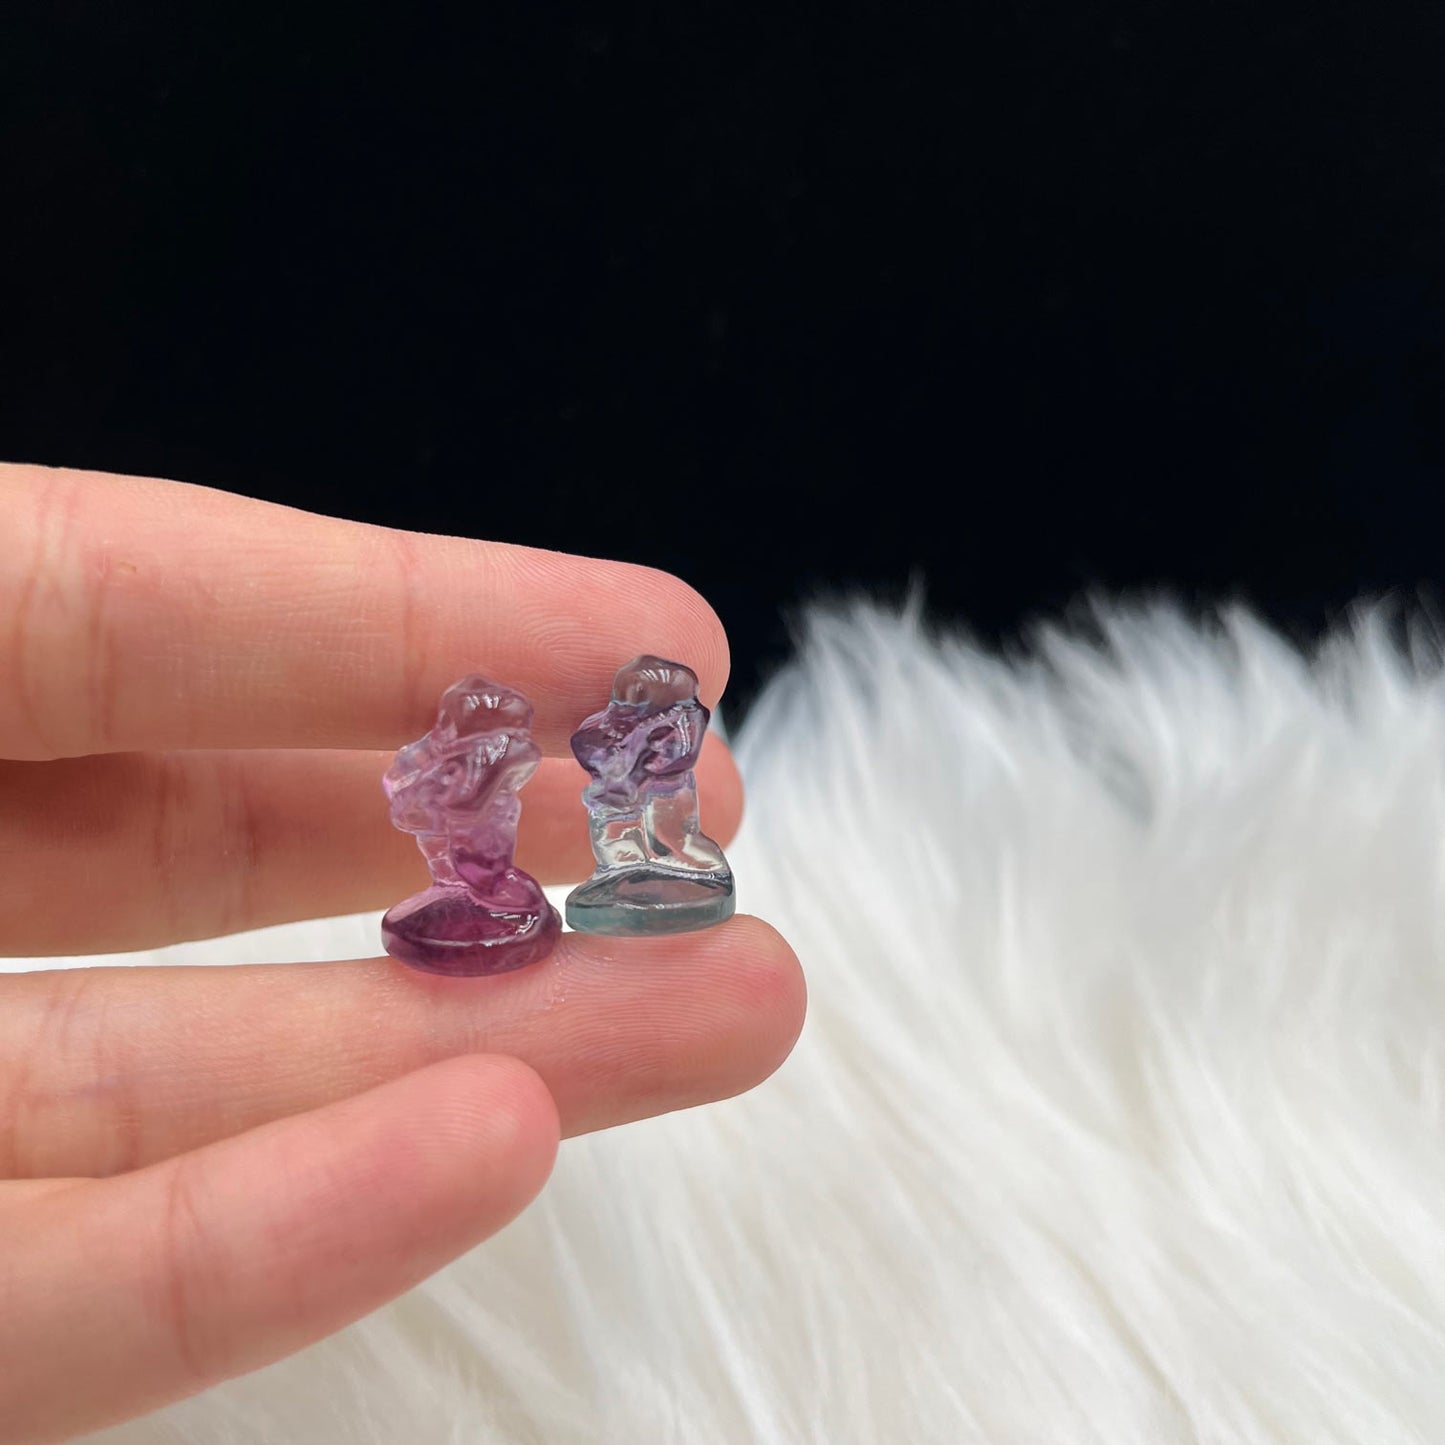 Mini Fluorite Crystal with Body Shark and Squirrel design, size 54